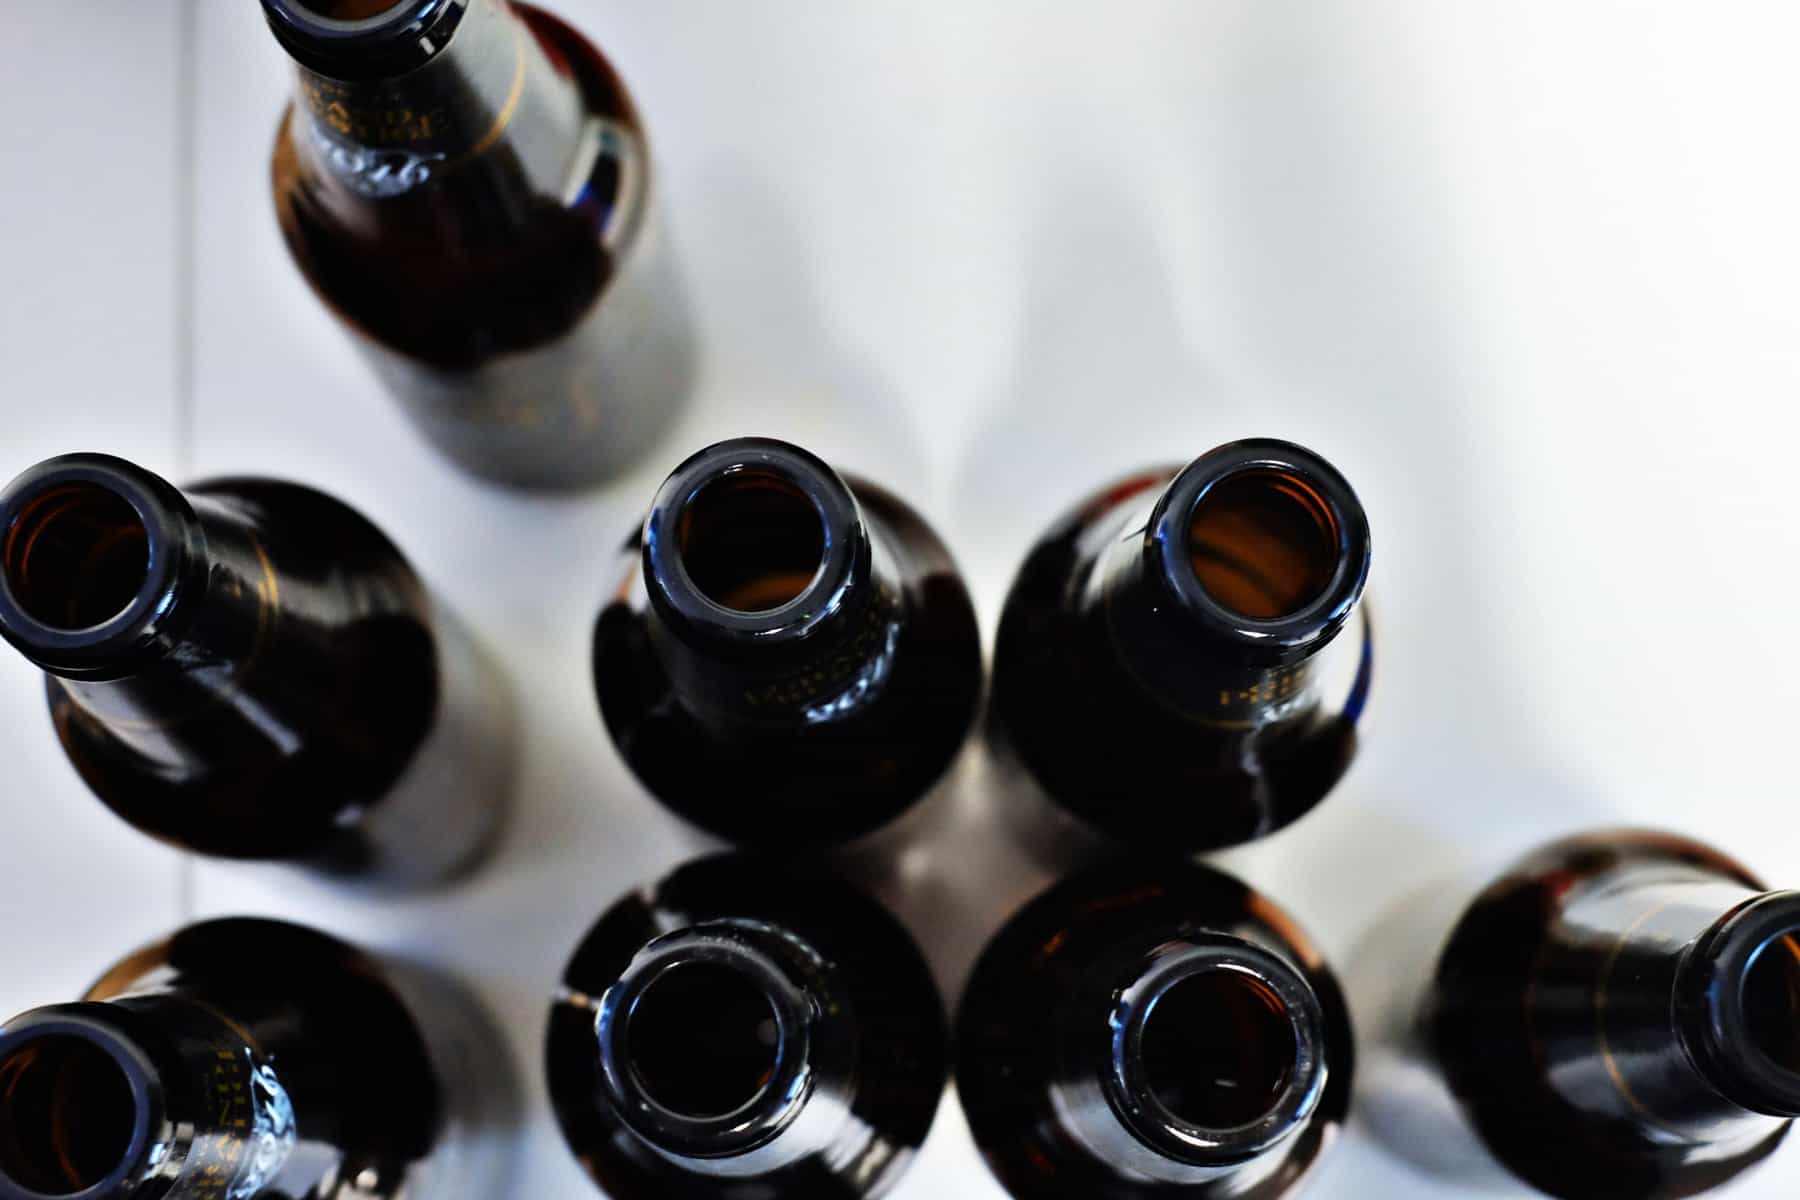 An aerial view of beer bottles on a white table represents the decision to pursue alcoholism treatment in Asheville.